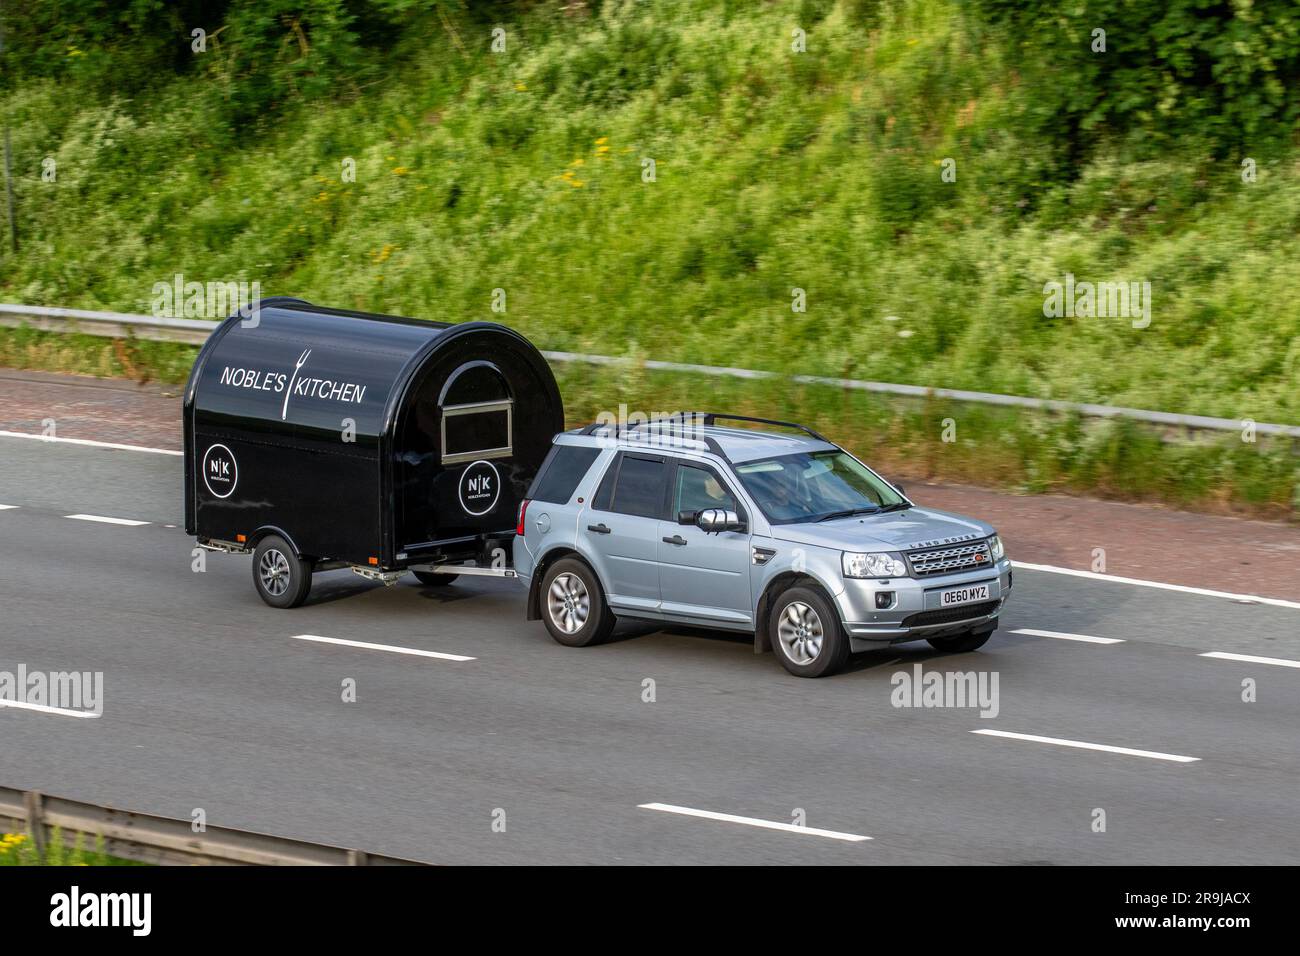 Nobles Kitchen catering trailer towed by 2011 Land Rover silver Freelander Xs Sd4 Auto SD4 190 Commandshift Auto Car SUV Diesel 2179 cc; travelling at speed on the M6 motorway in Greater Manchester, UK Stock Photo